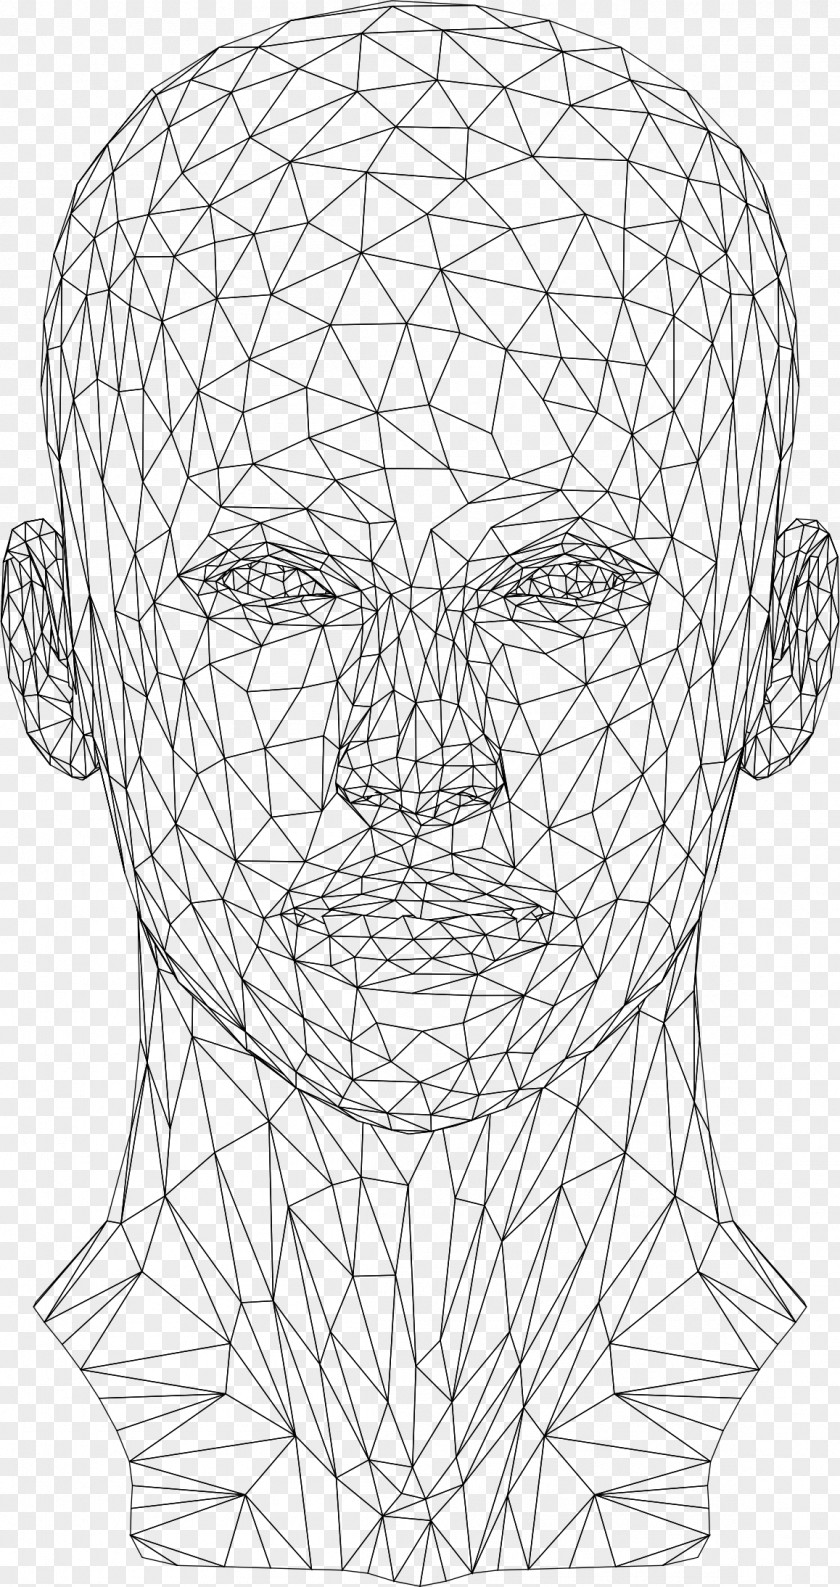 Wires Website Wireframe Wire-frame Model Human Head PNG